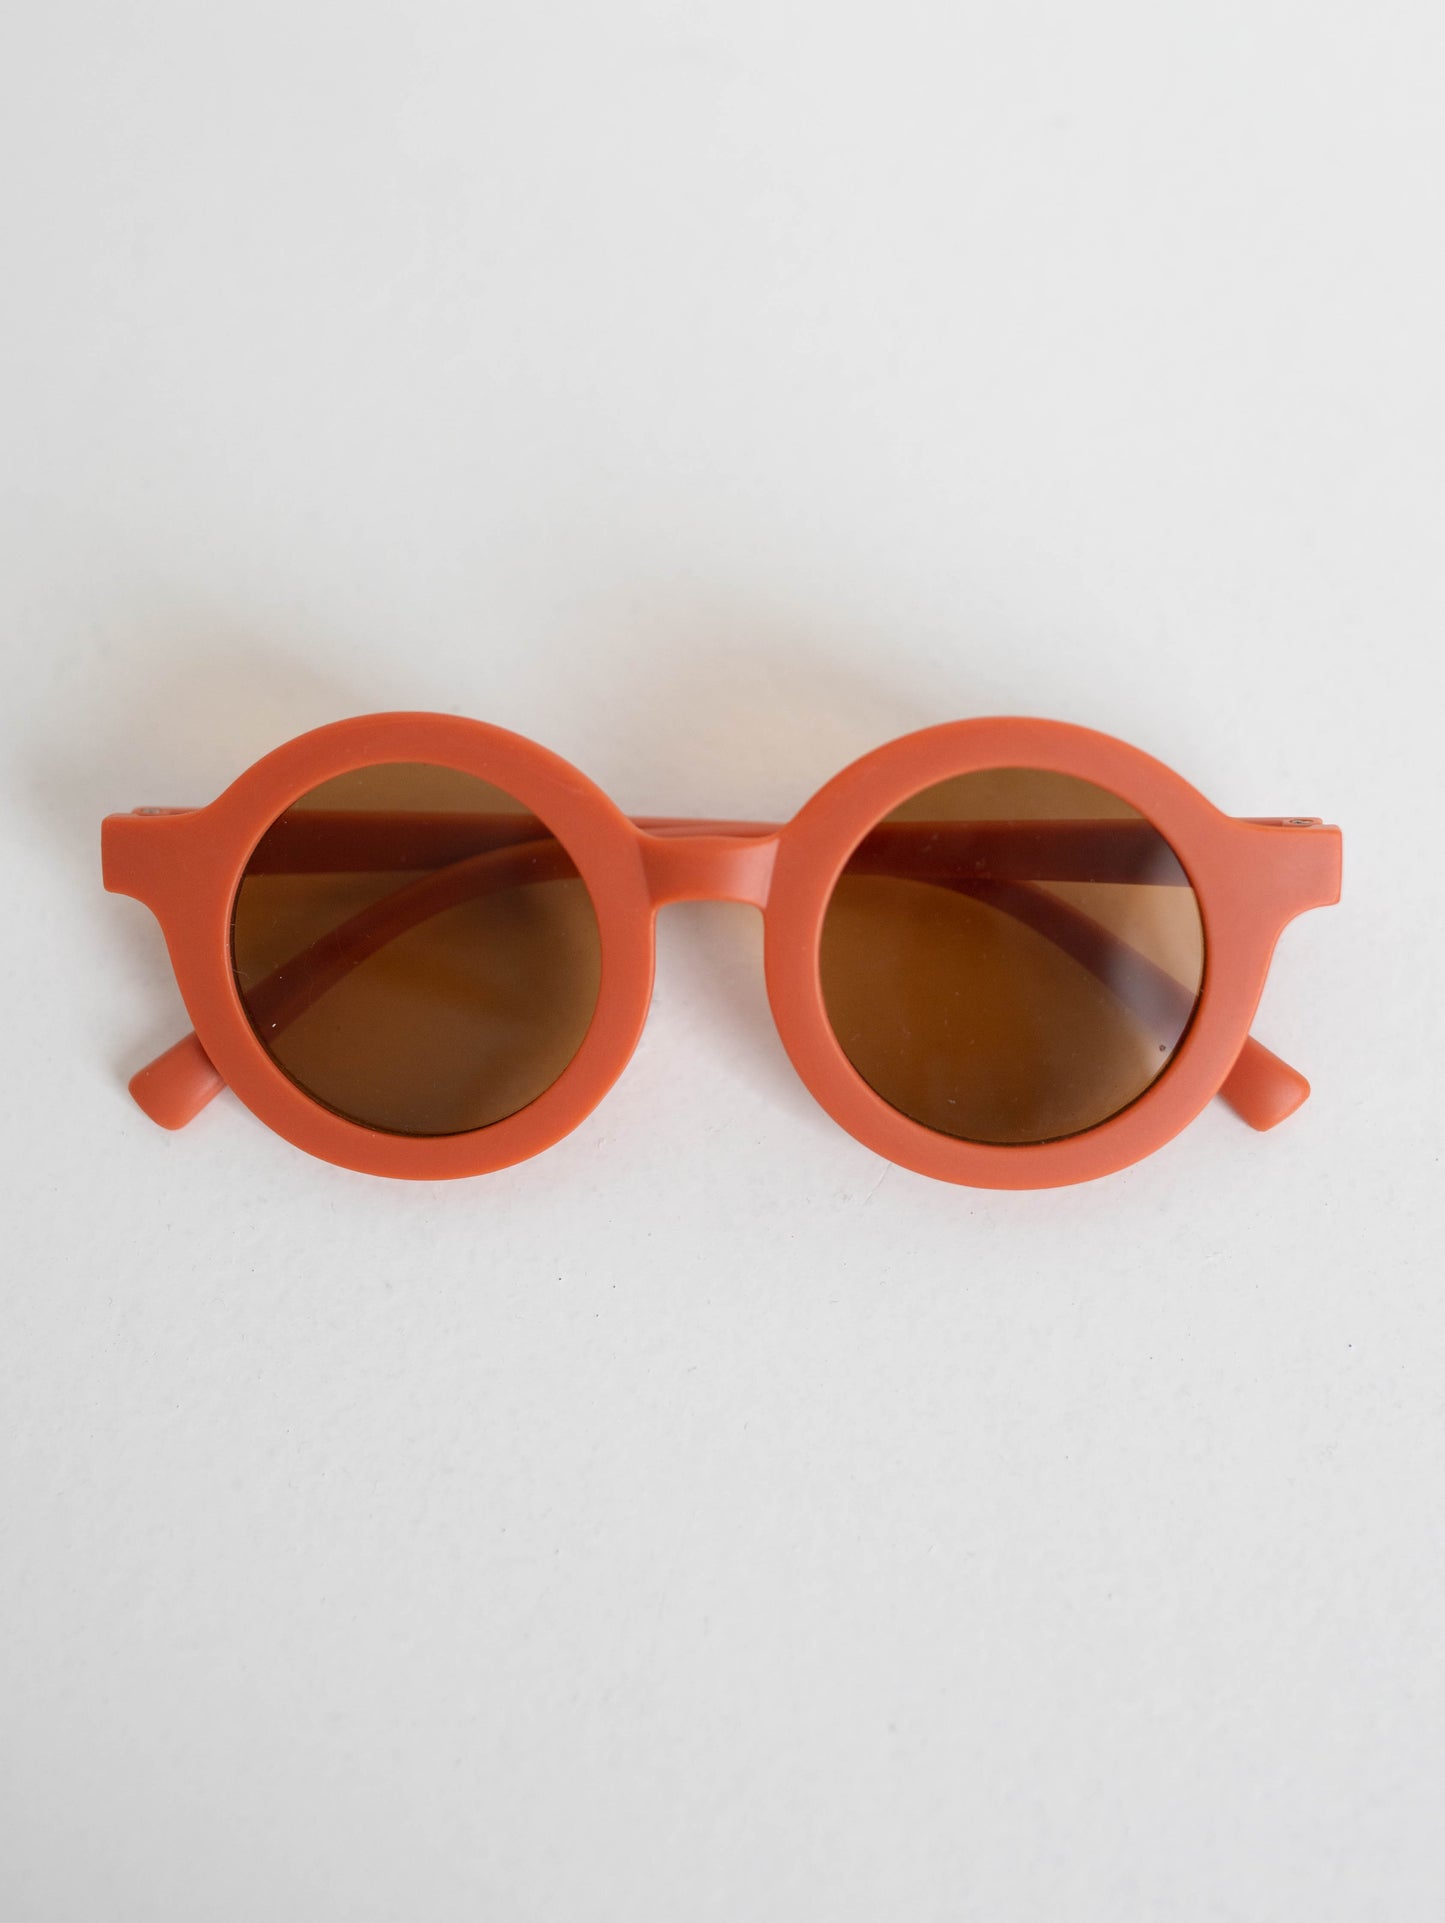 Cool Kid Sunglasses | Cute Playful Sunglasses | Kylo and Co.